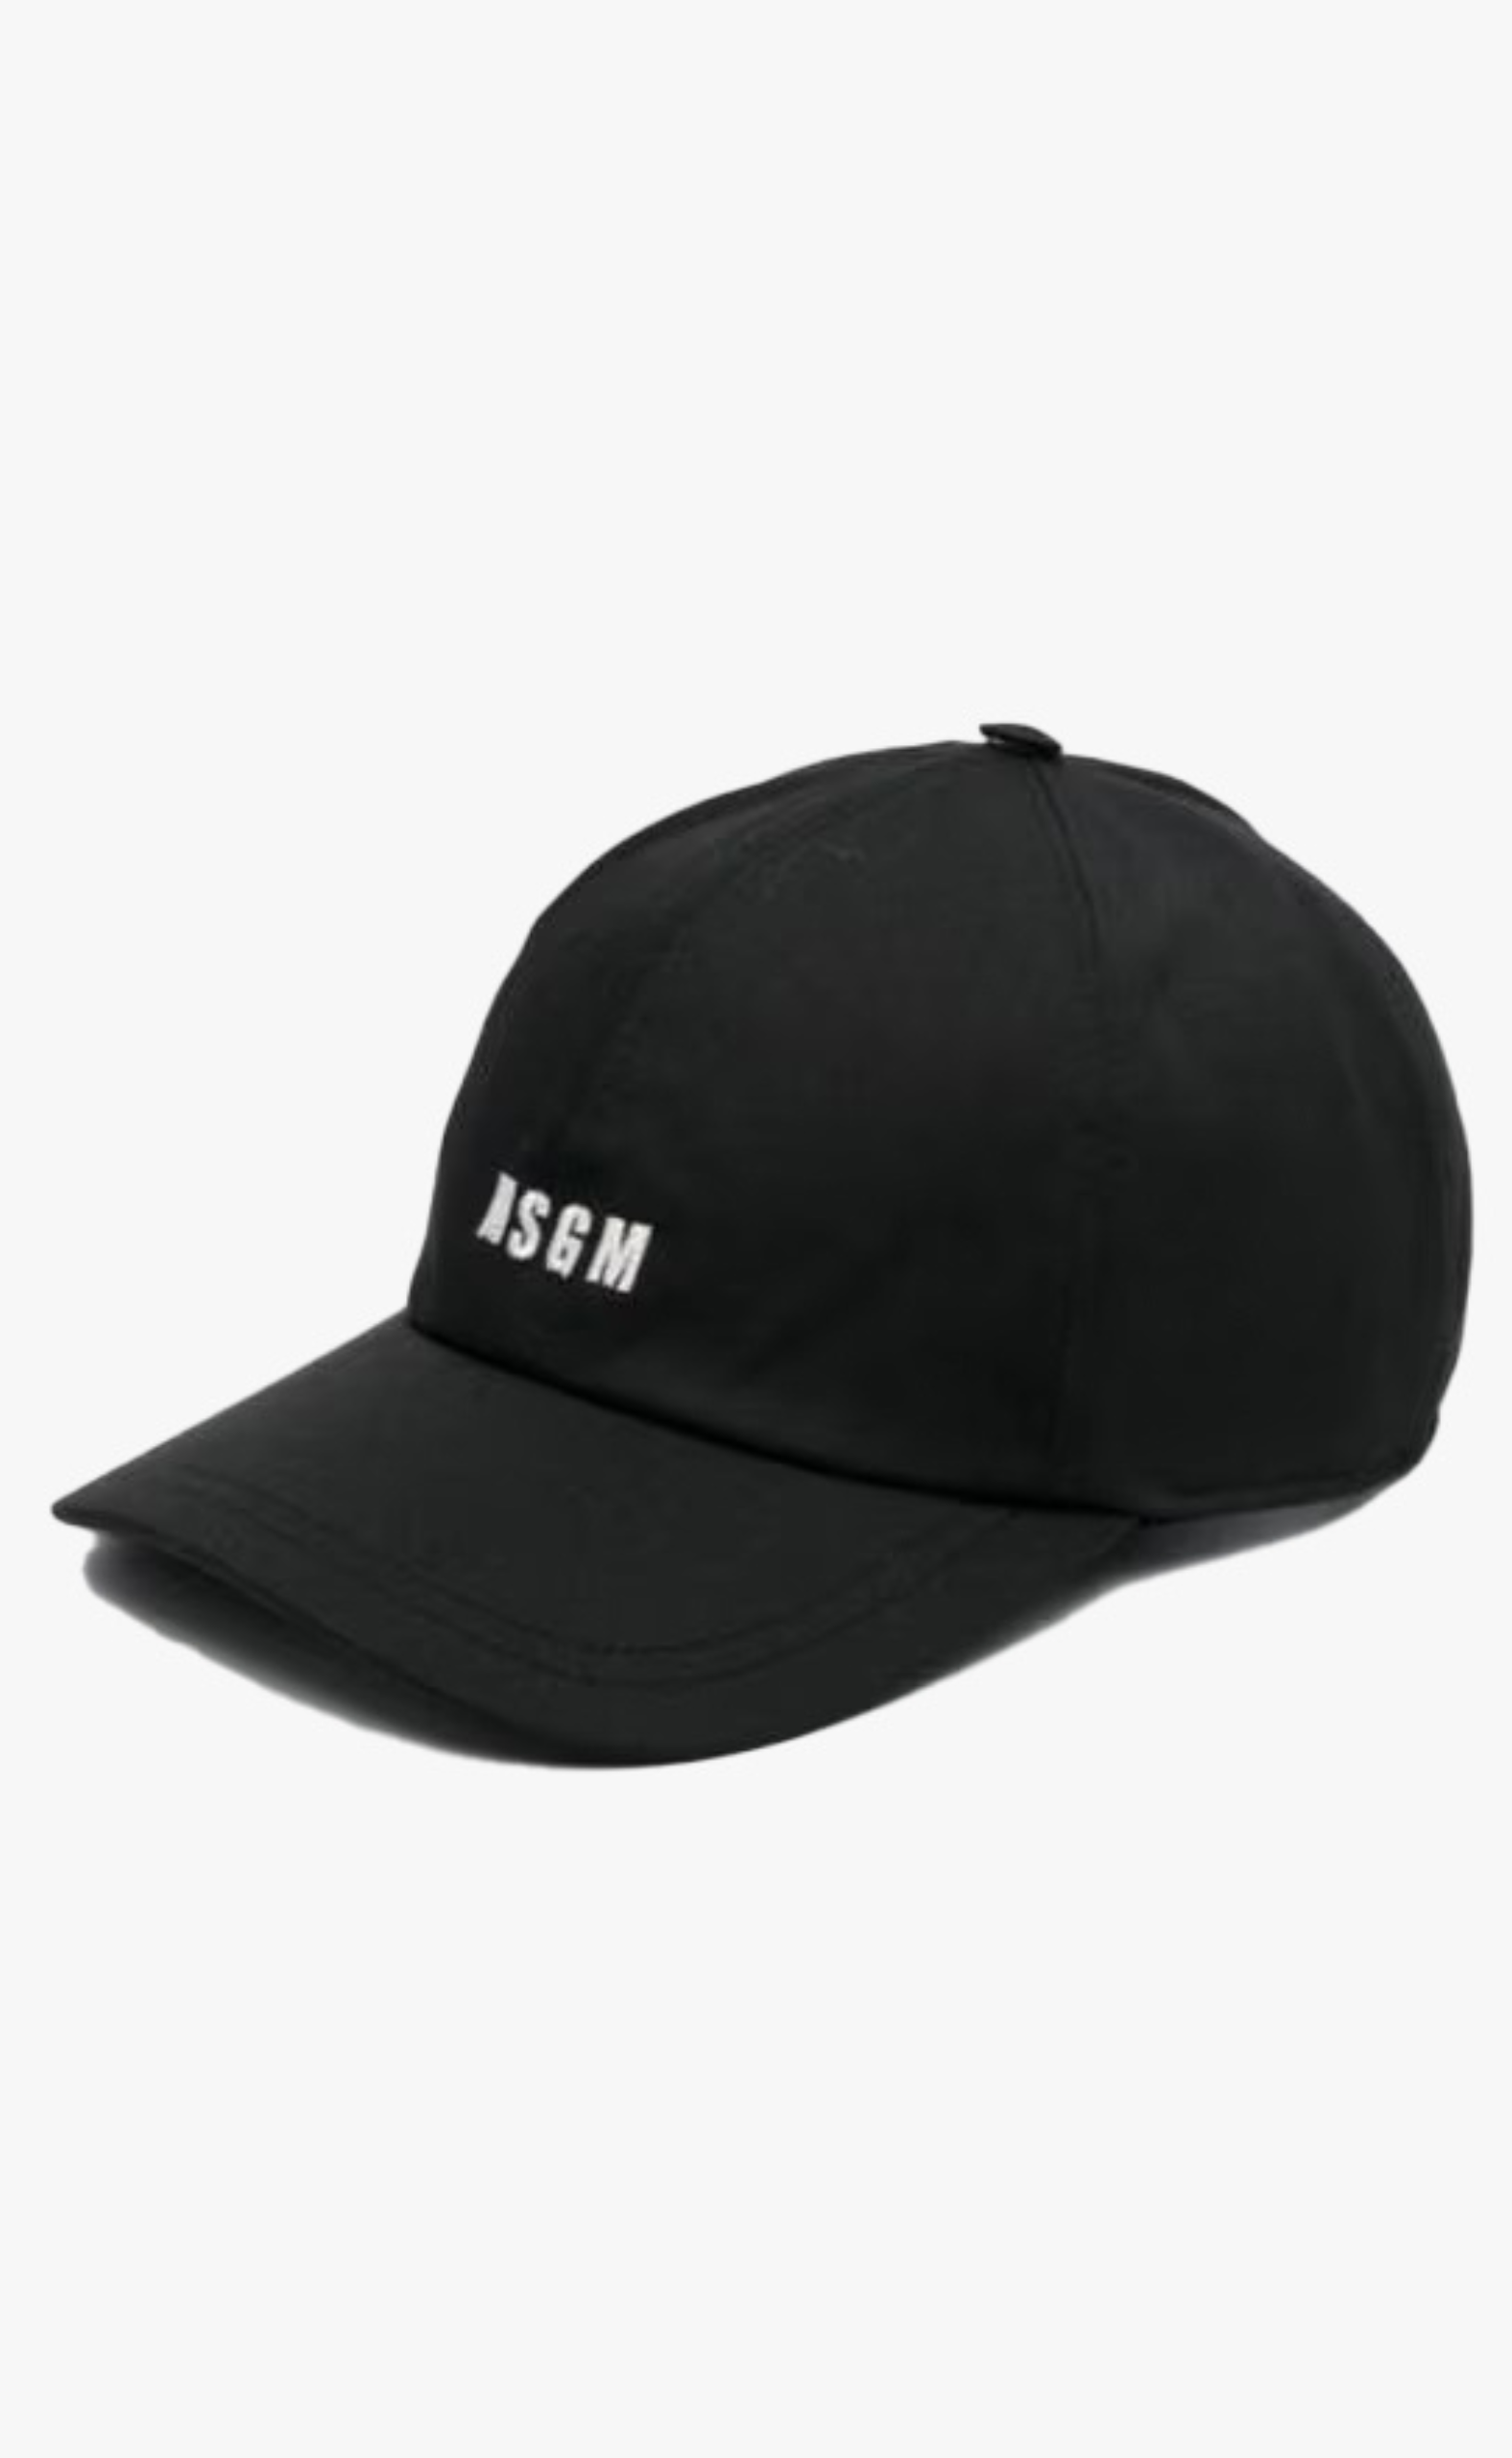 BASEBALL CAP WITH EMBROIDERED LOGO BLACK HAT